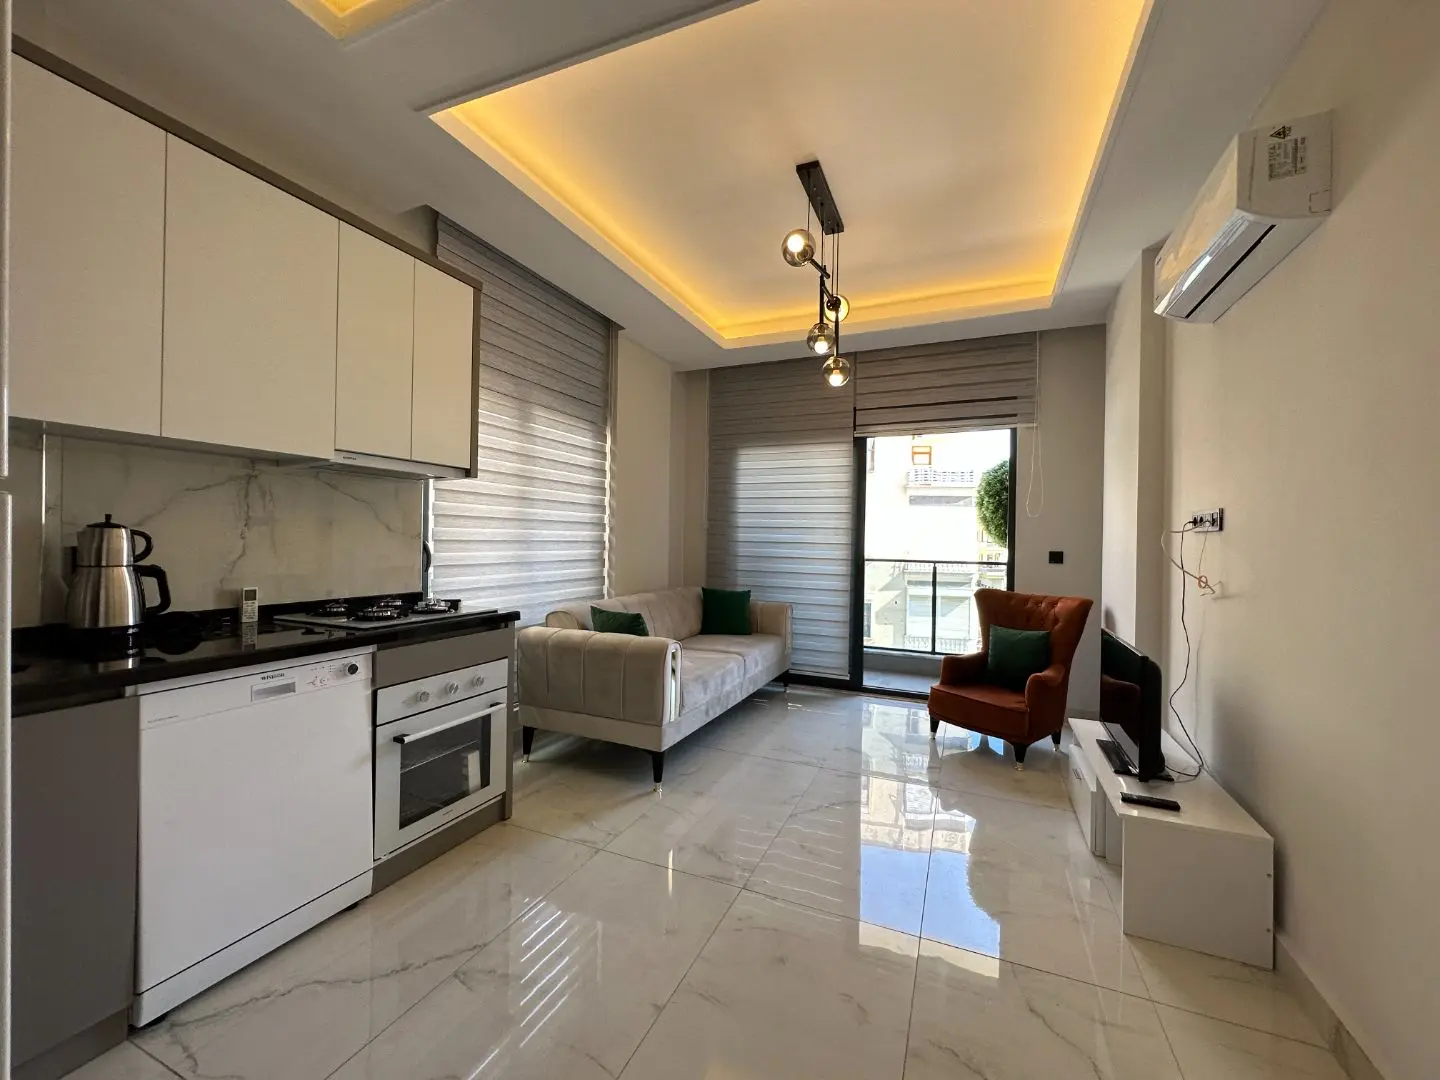 NEW 1+1 FURNISHED FLAT IN ALANYA CENTER